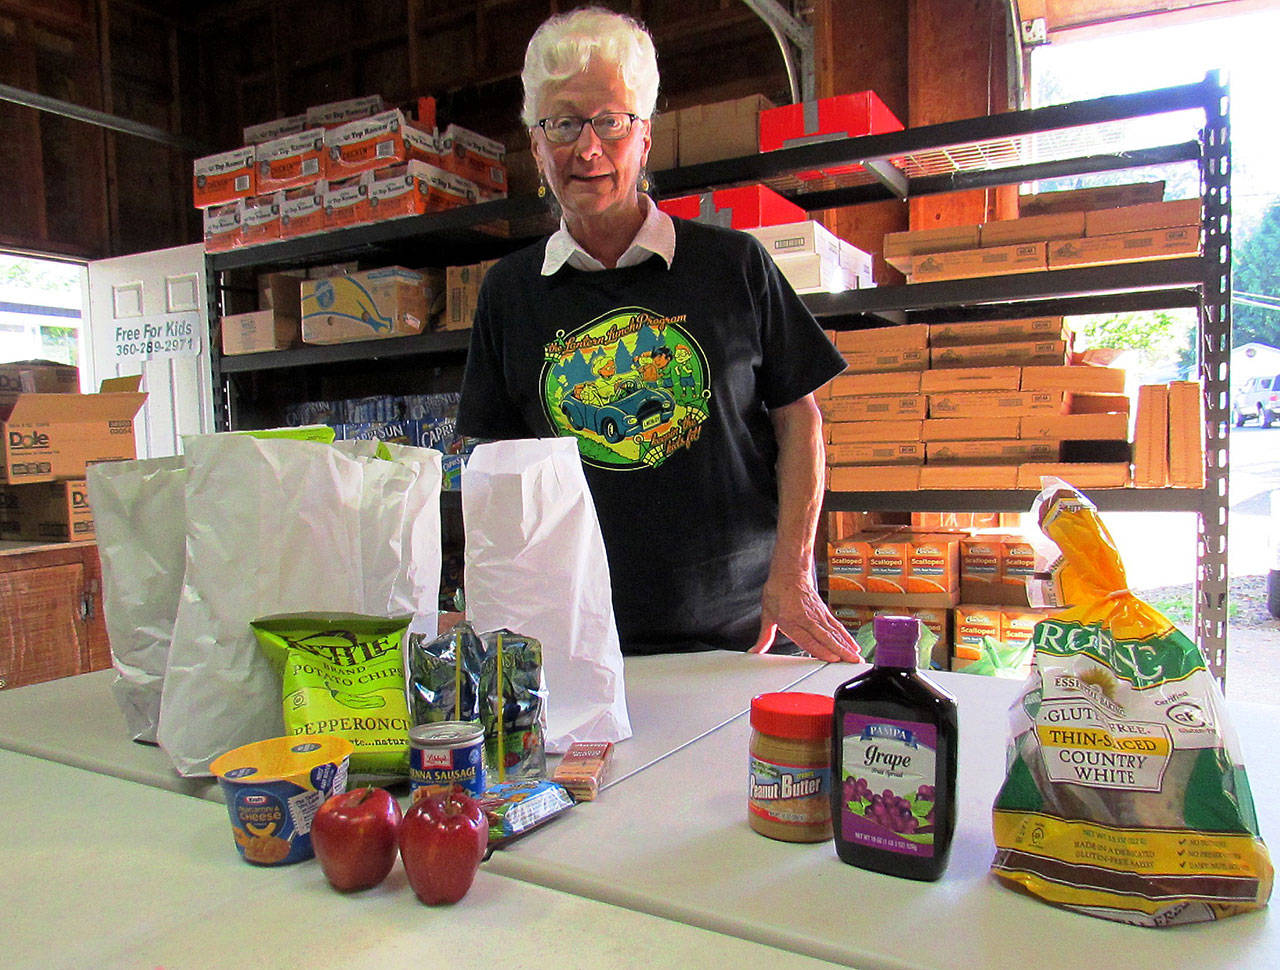 Scott D. Johnston photo: Phyllis Shaughnessy is pictured with a weekend food pack for four, with four individual weekend lunch bags and some extra family items, meant to feed four kids for two days